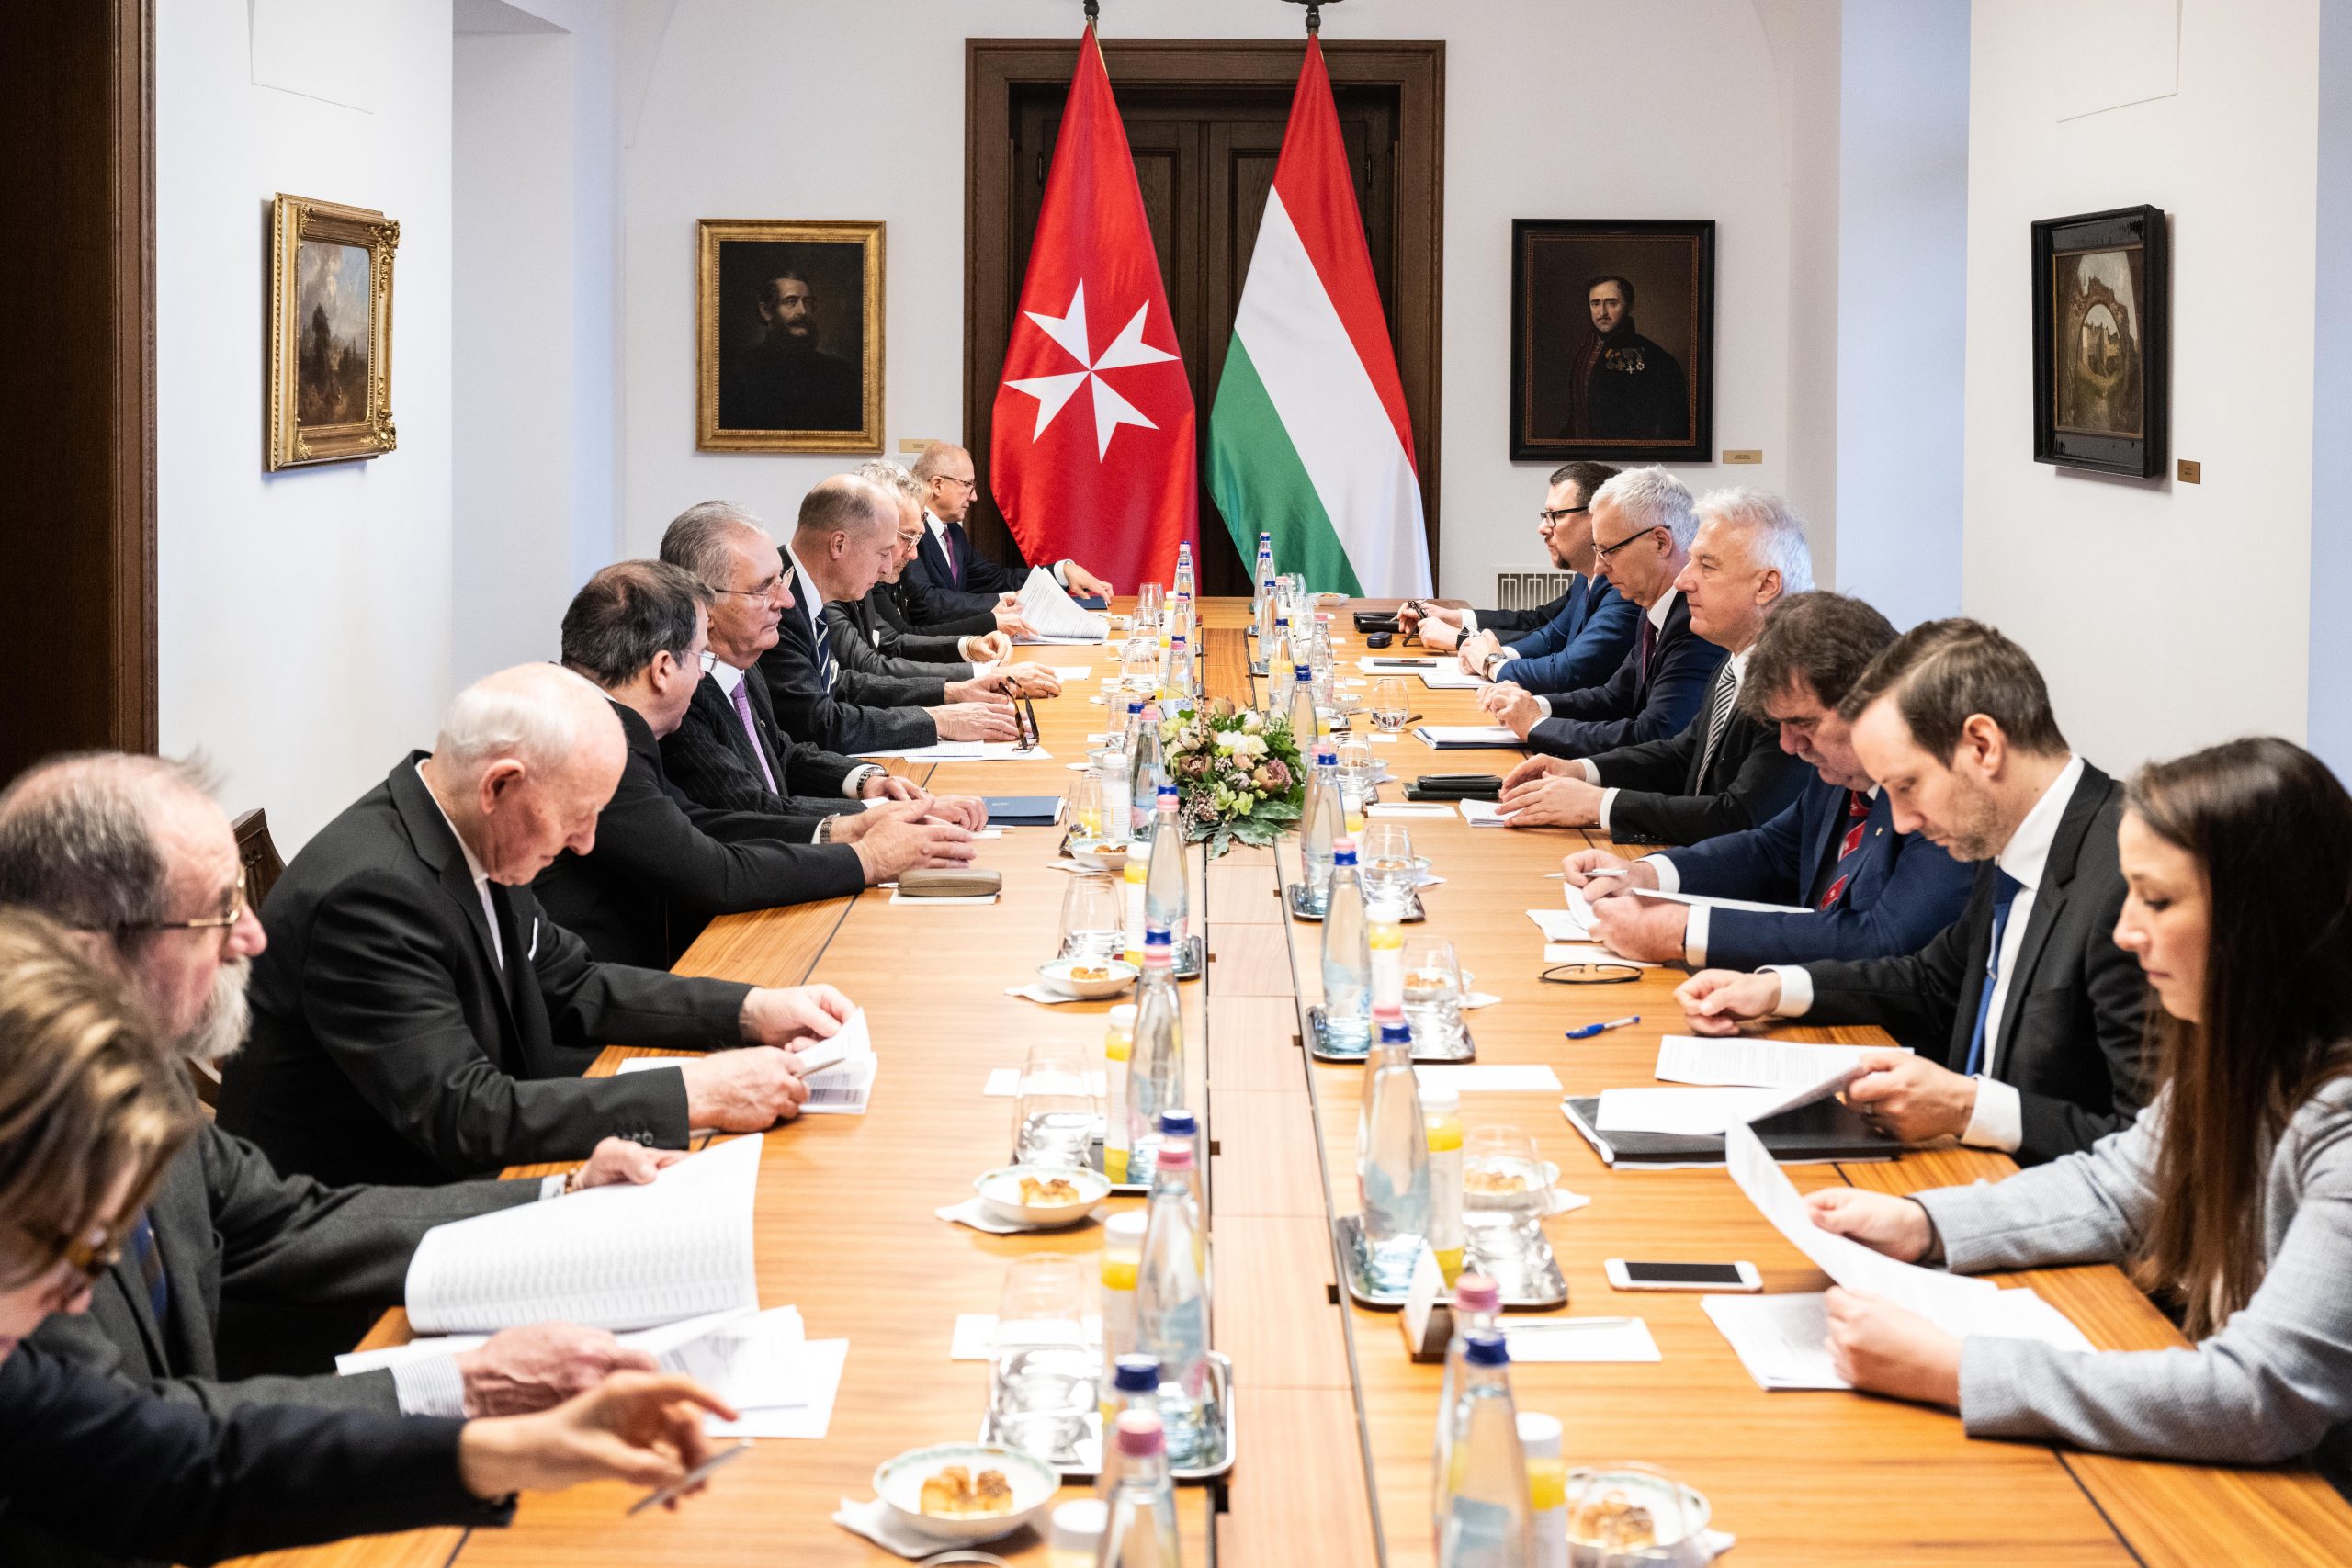 Annual bilateral meeting with the Government of Hungary